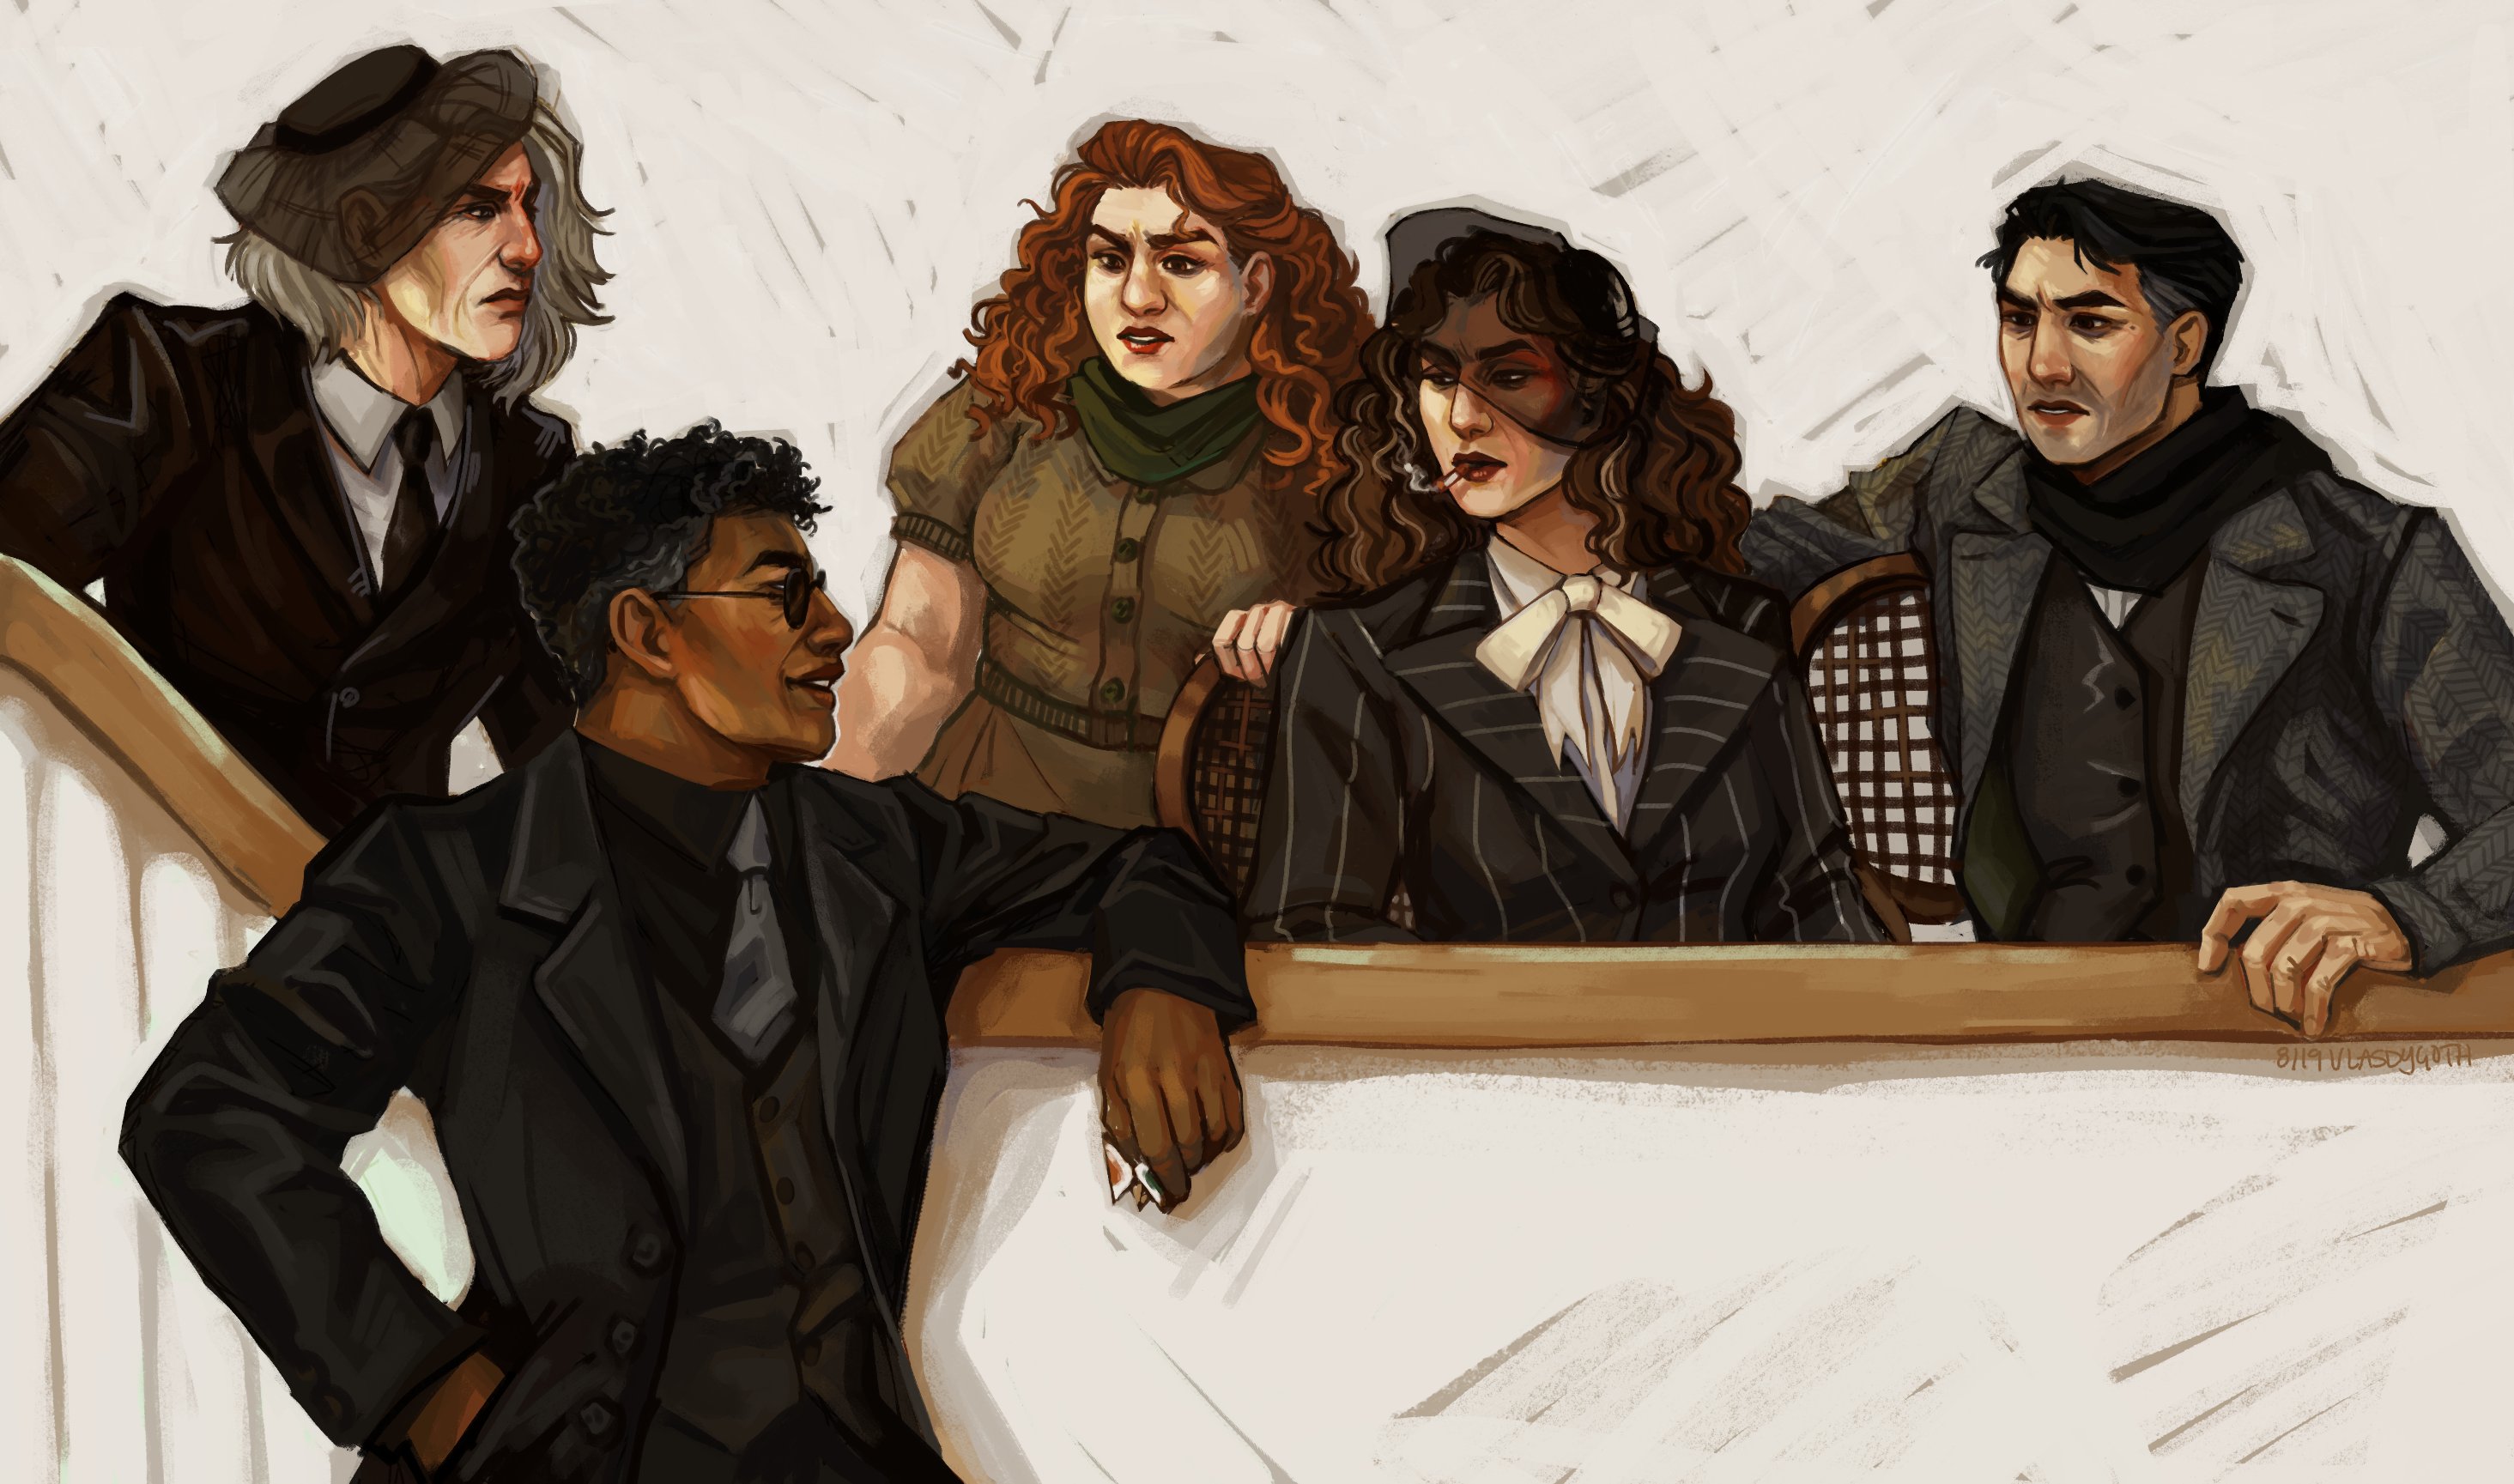 A digital painting of the characters from Messy Business sitting behind a white wall that Hector Hu is leaning on, arm on the banister, smiling at them. From left to right, Florence, Chris, Maggie, and Heard are all reacting in various states of shock.